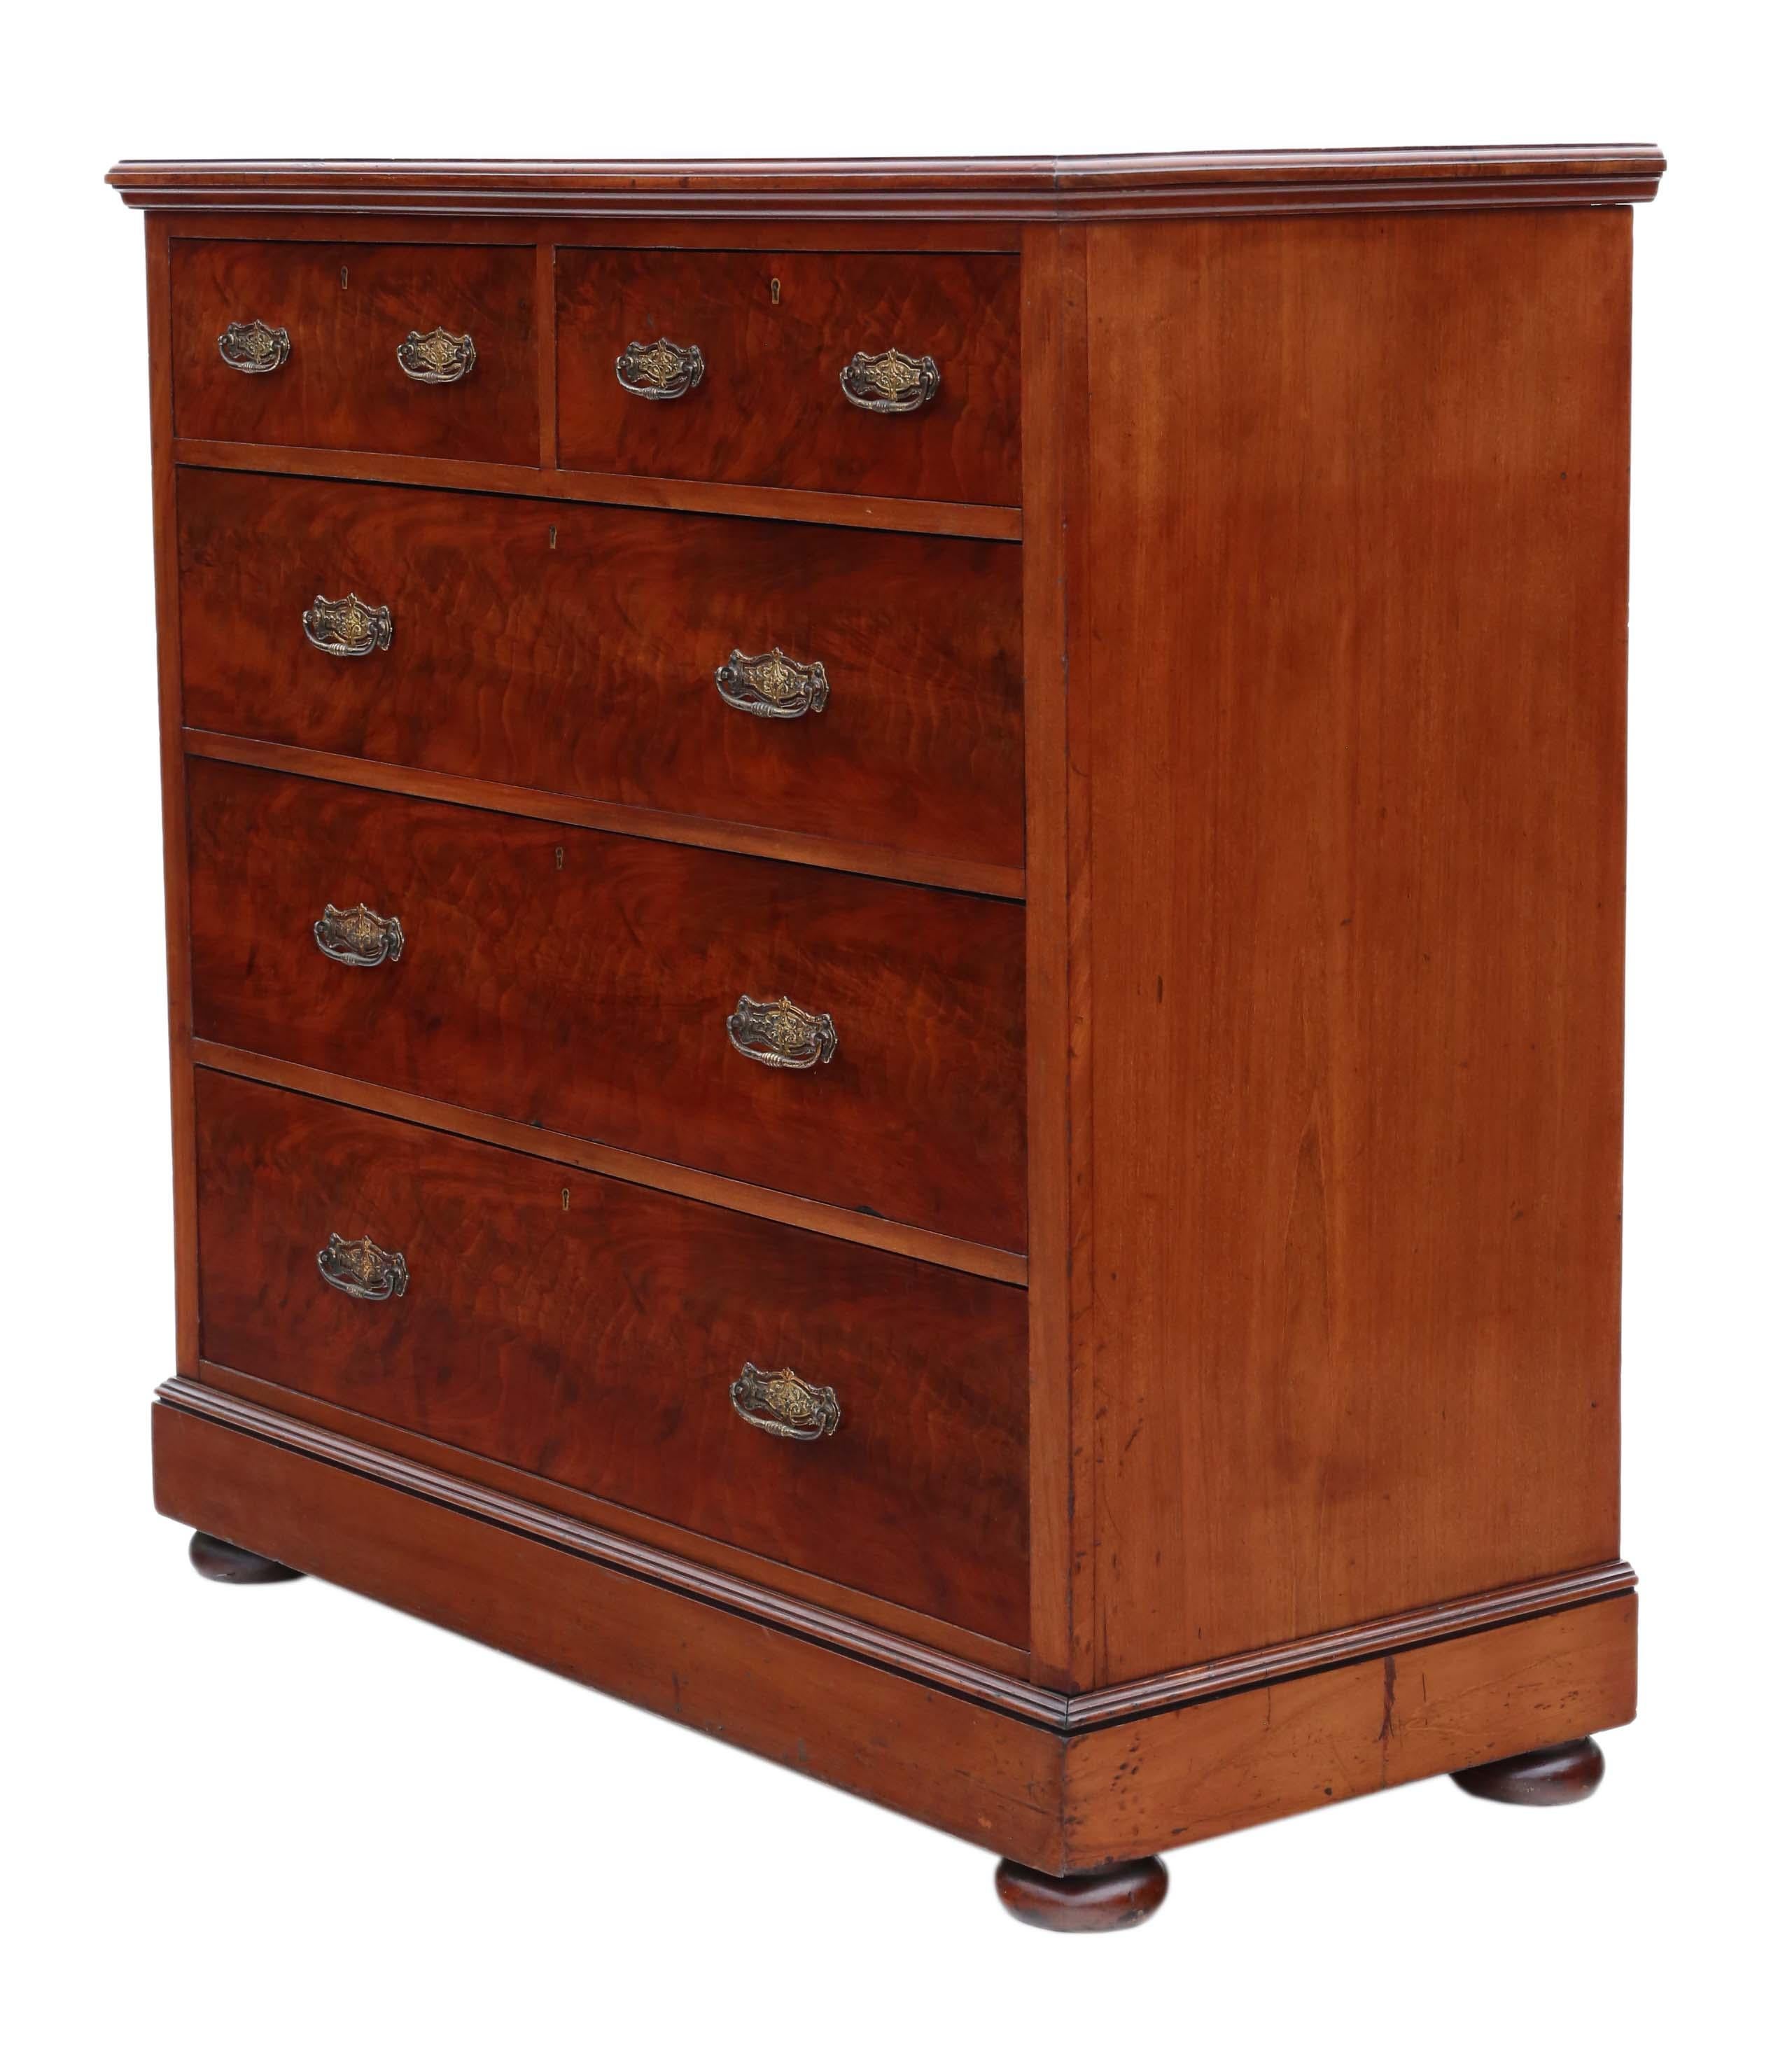 Early 20th Century Antique Large Victorian circa 1900 Flame Mahogany Chest of Drawers